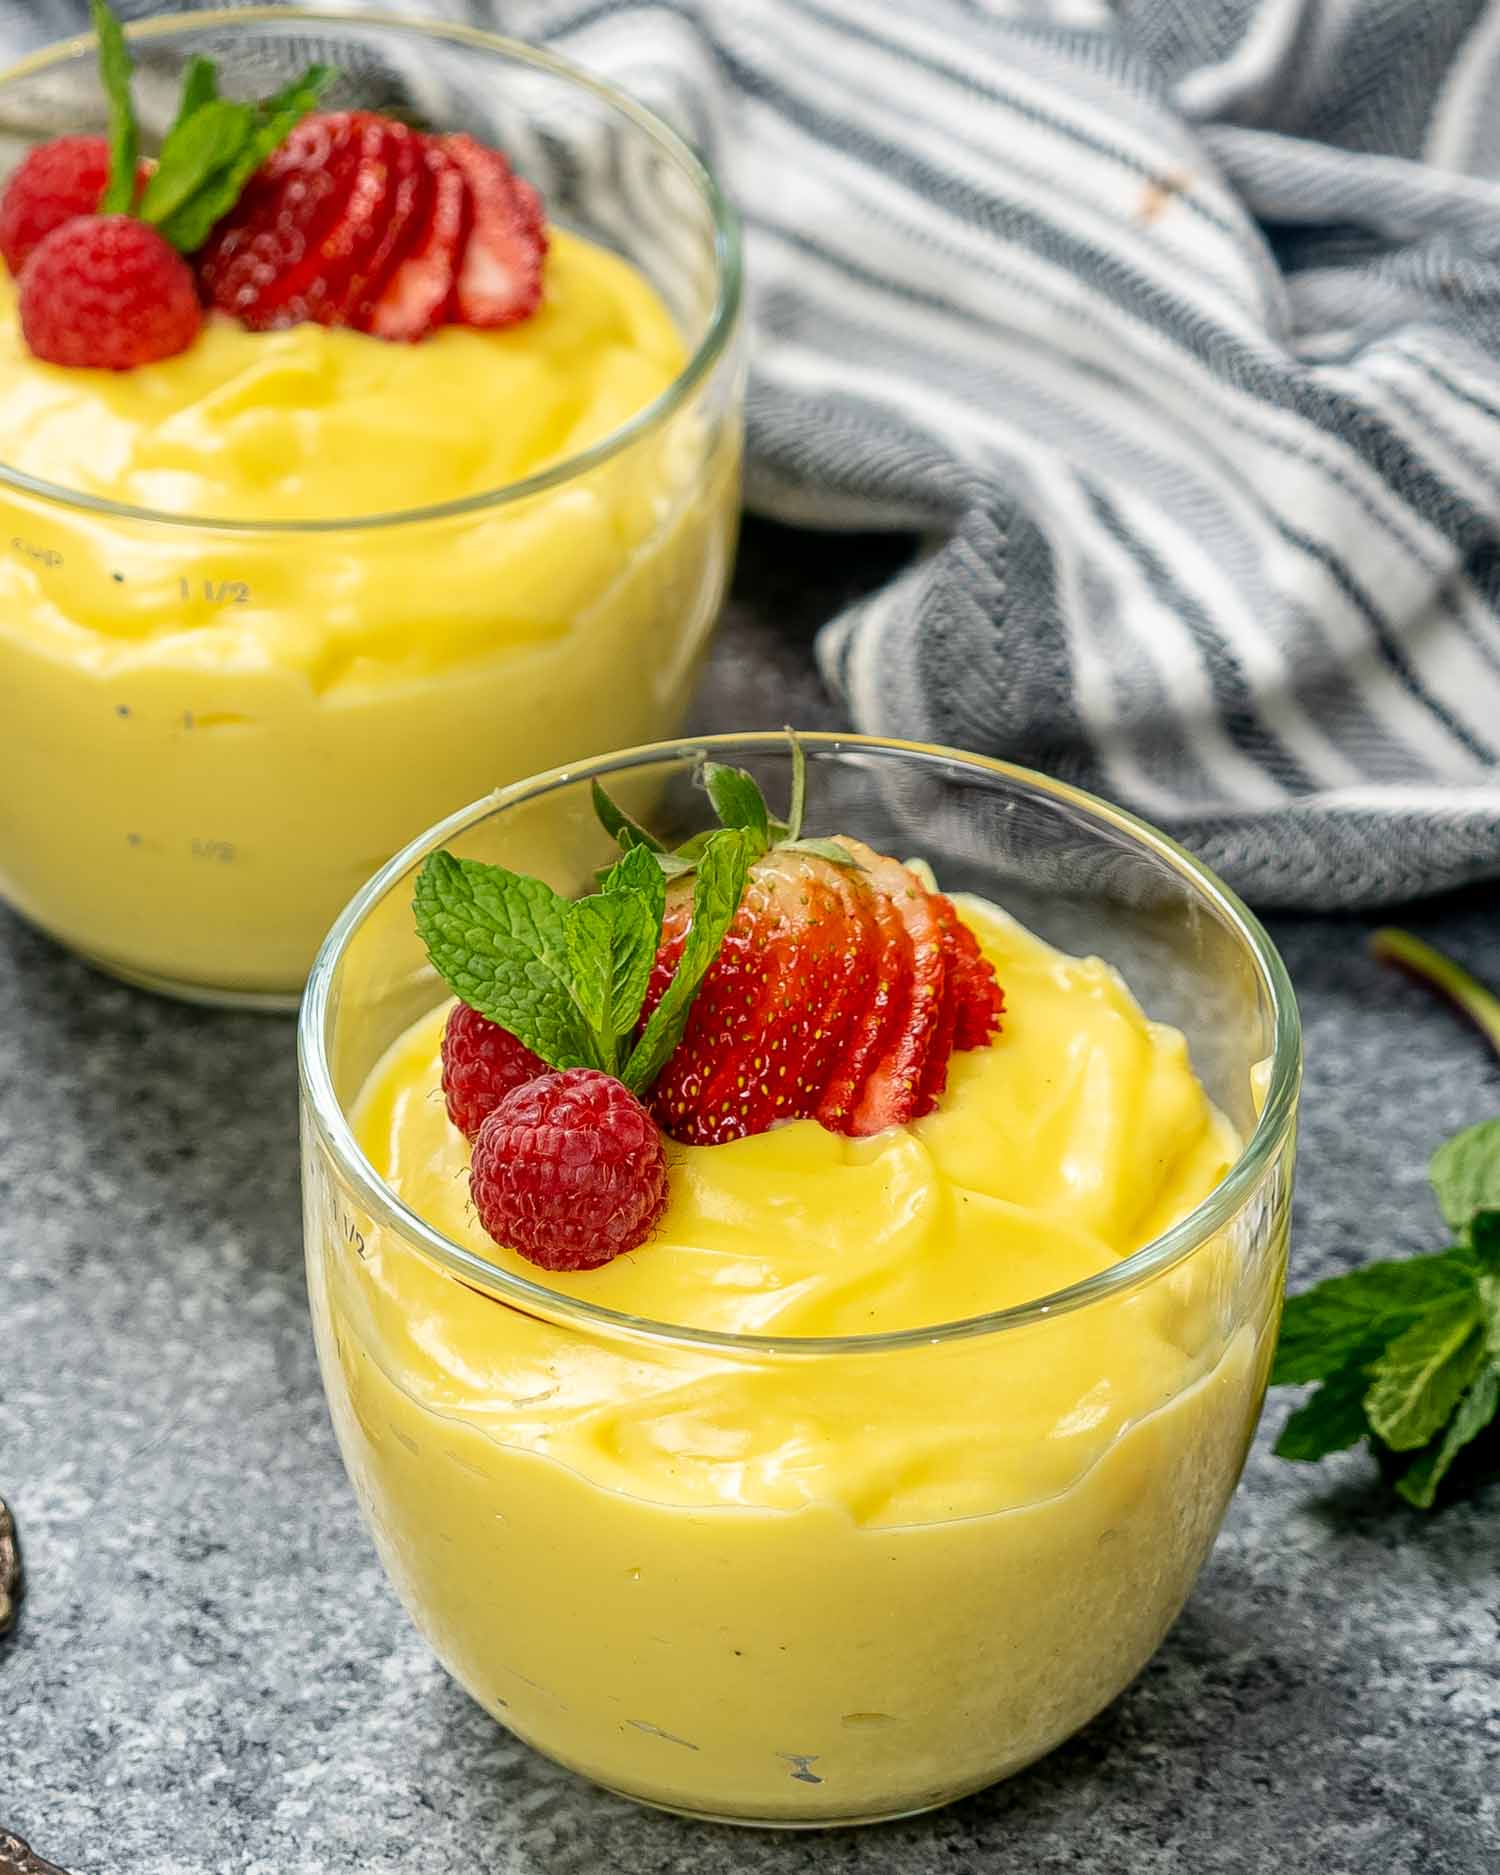 vanilla custard in two glass bowls topped with strawberries.